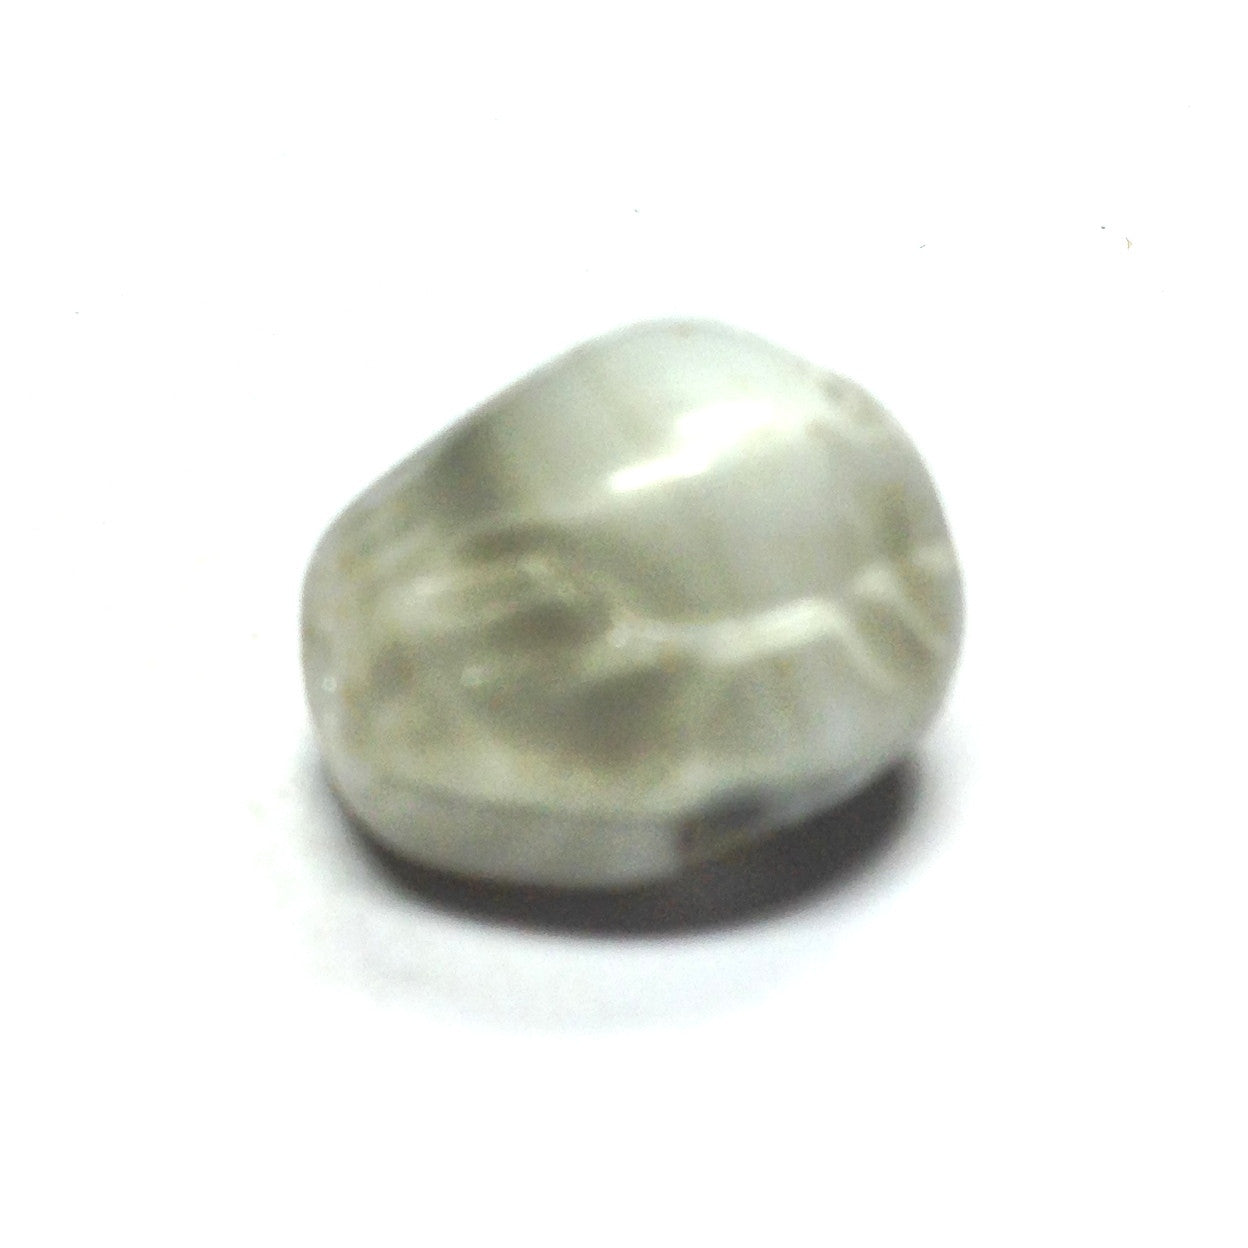 10X9MM Lt.Grey/White Glass Bead (36 pieces)